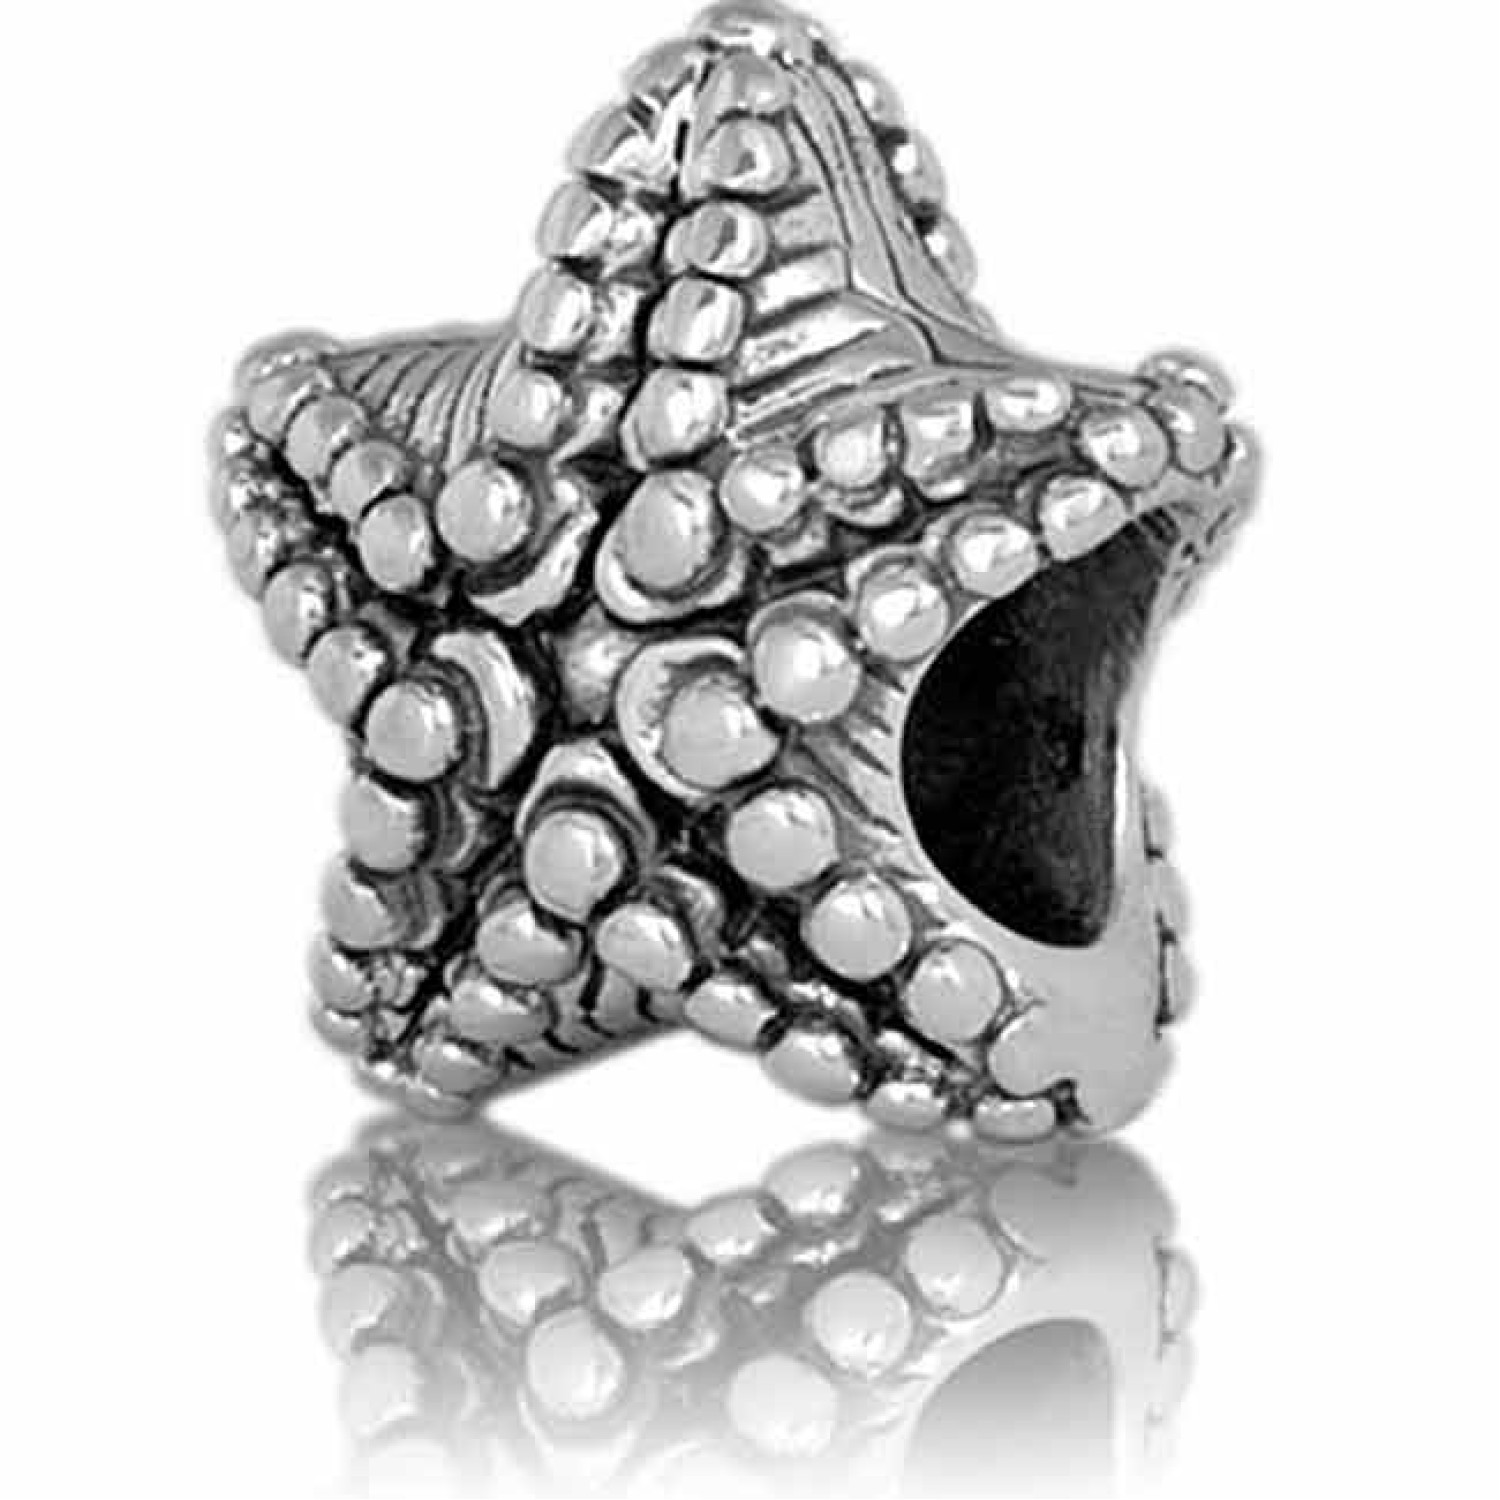 LK091 Evolve Charms Starfish. Evolve New Zealand Starfish Charm The starfish reminds us of long, hot summer days spent at New Zealand’s many beautiful beaches up and down the treasured coast line.  Days spent swimming, building sandcastles @christies.onli